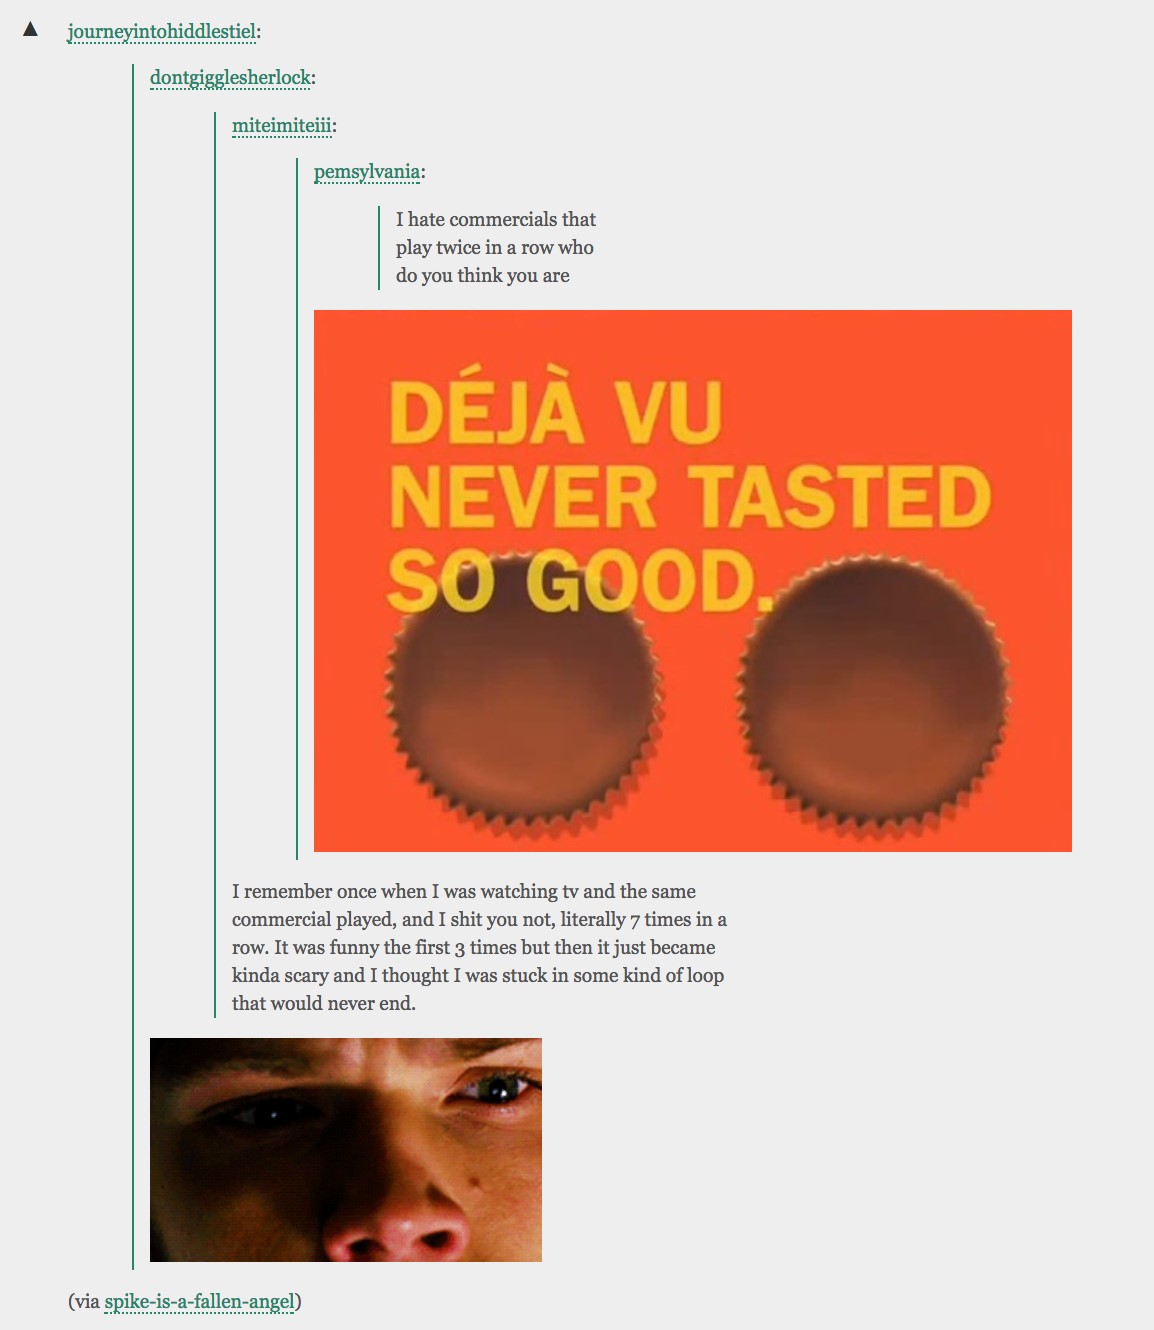 The first post in this screenshot is the text 'I hate commercials that play twice in a row who do you think you are.' Below that is an advertisement for Reese's Peanut Butter Cups. The ad features two peanut butter cups with the caption 'Déjà vu never tasted so good.' The Reese's advertisement is followed by the text 'I remember once when I was watching tv and the same commercial played, and I shit you not, literally 7 times in a row. It was funny the first 3 times but then it just became kinda scary and I thought I was stuck in some kind of loop that would never end.' Underneath this is a GIF of Padalecki as Sam, his eyes opening and he bolts up in bed.